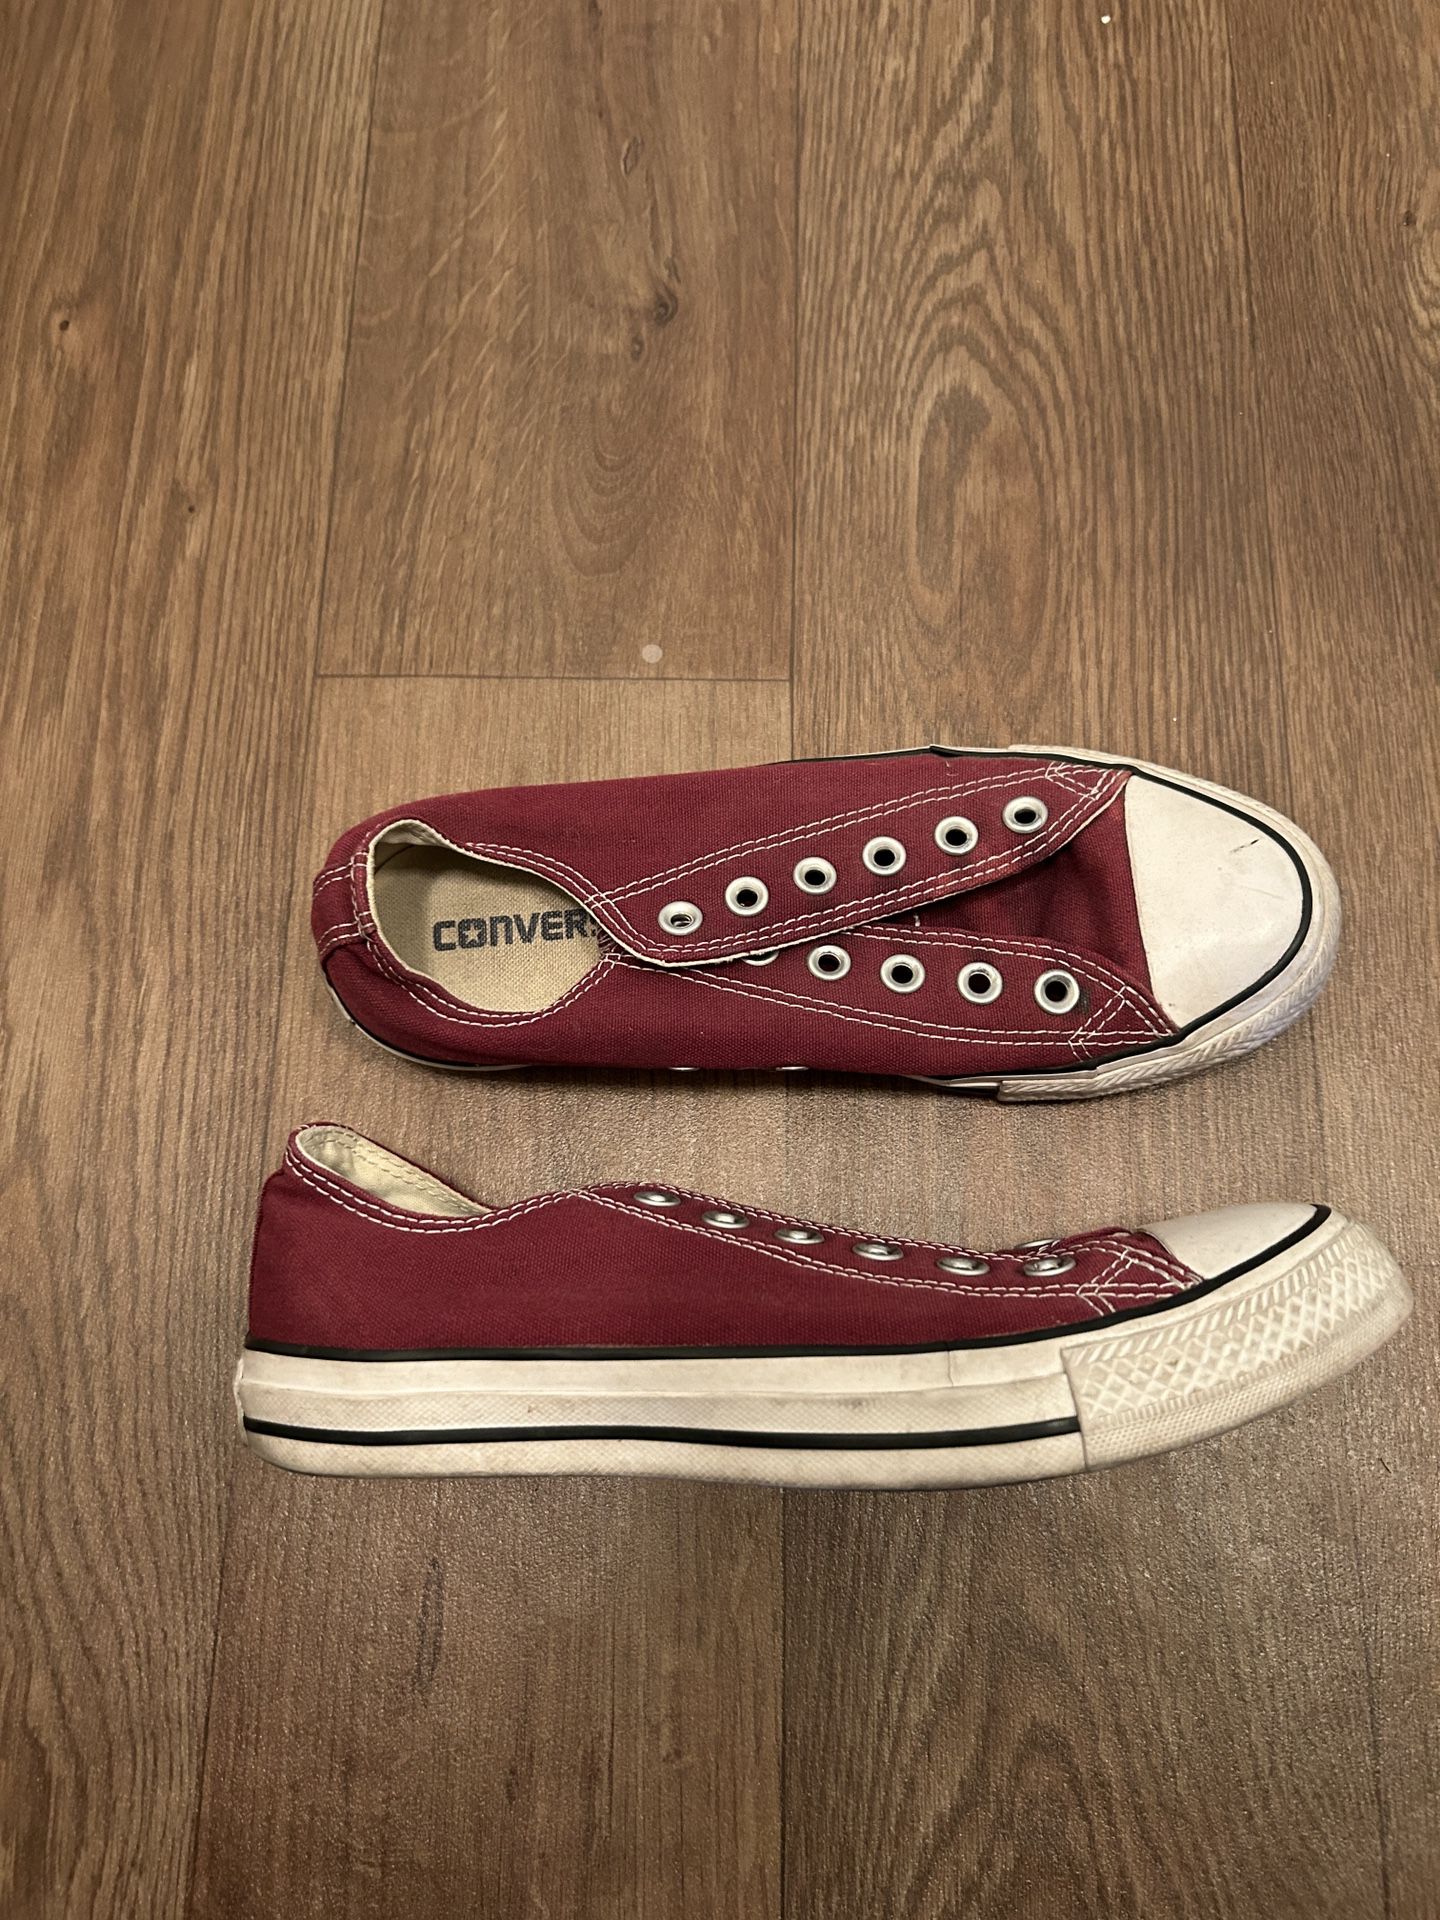 Converse Chuck Taylor Low Top Casual Shoes In Maroon, Women’s Size 8, Or Men’s Size 6